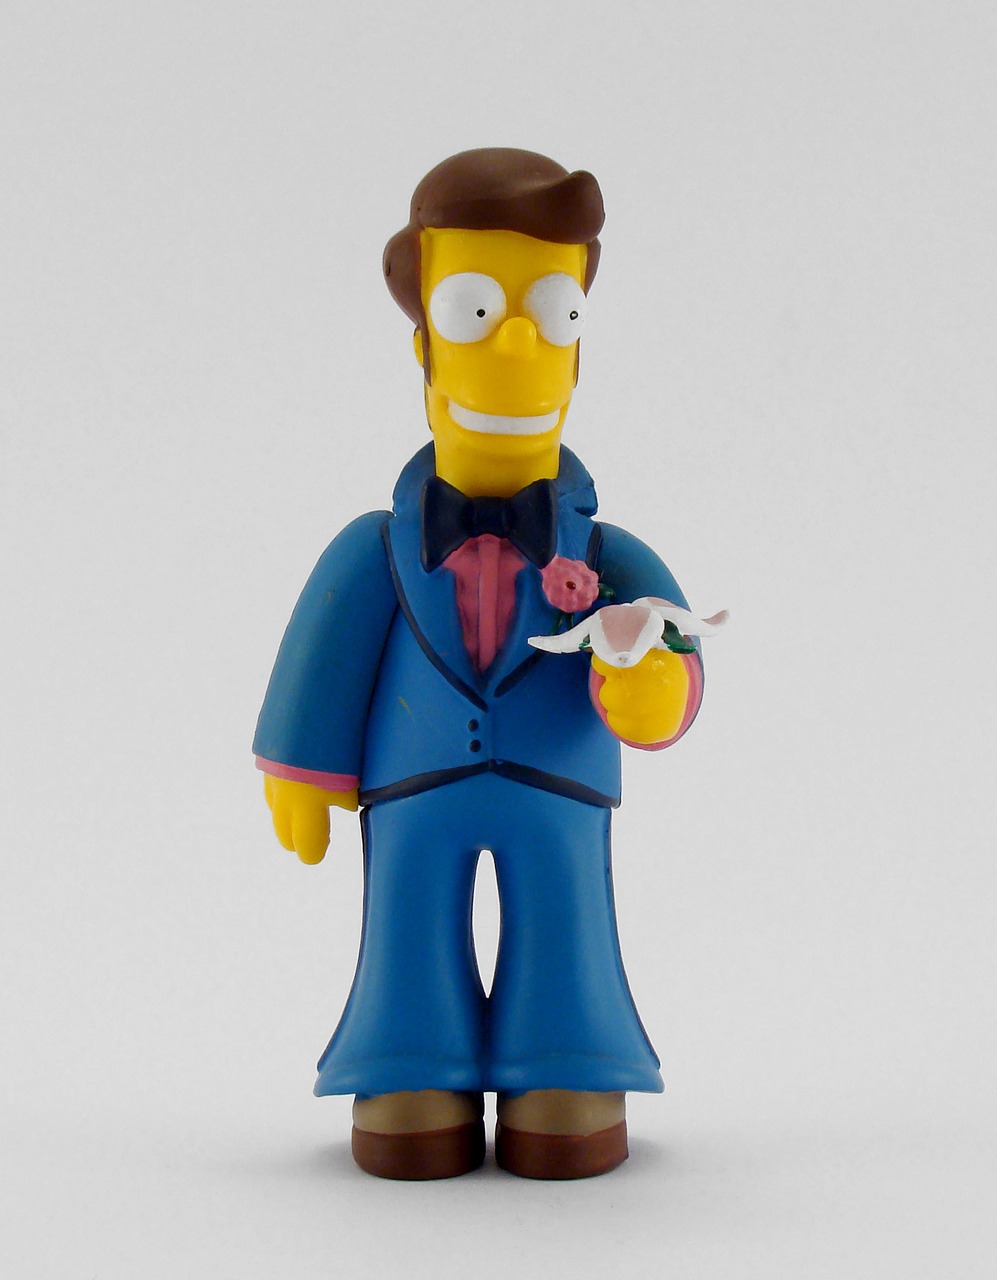 toy simpsons homer free photo